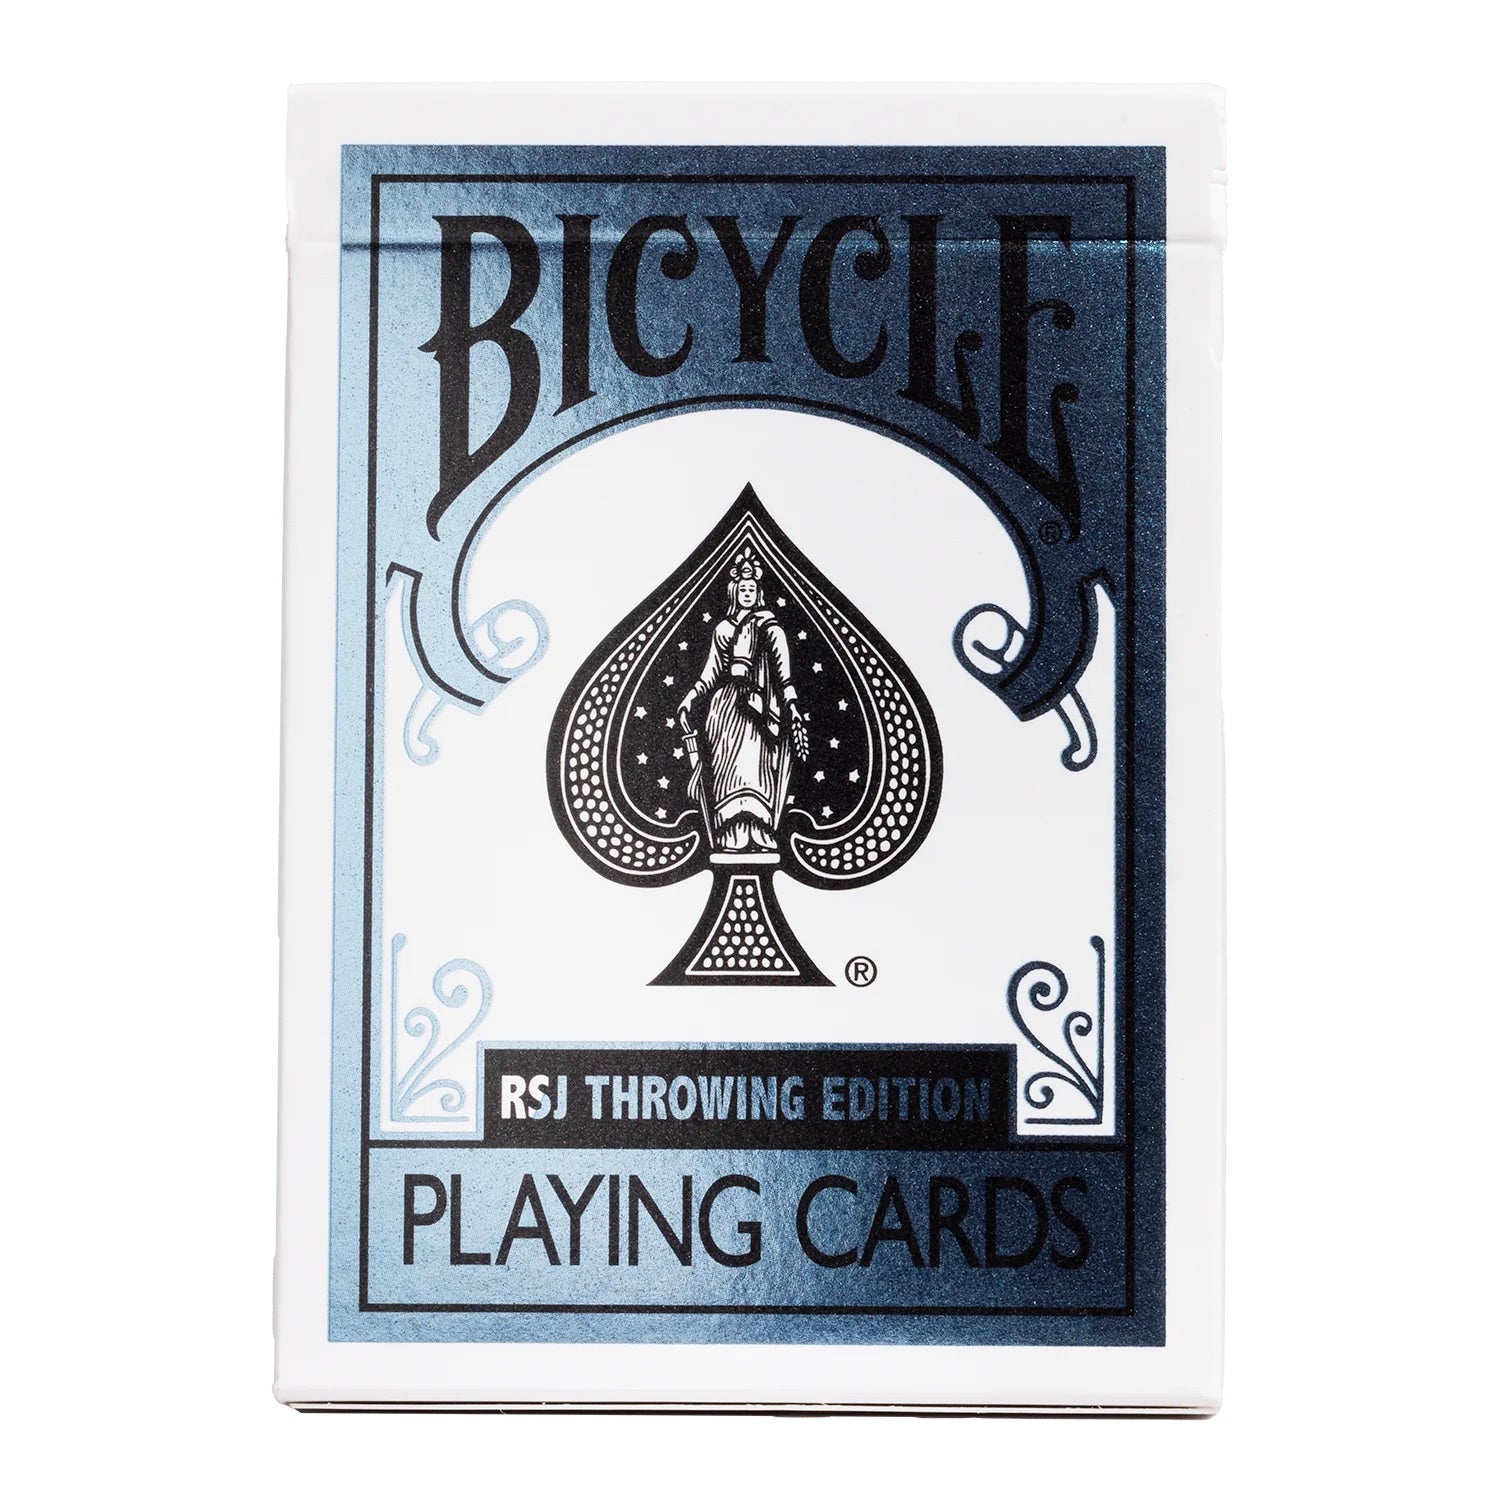 Bicycle Rick Smith Jr. Throwing Edition with Cardtopia Seal